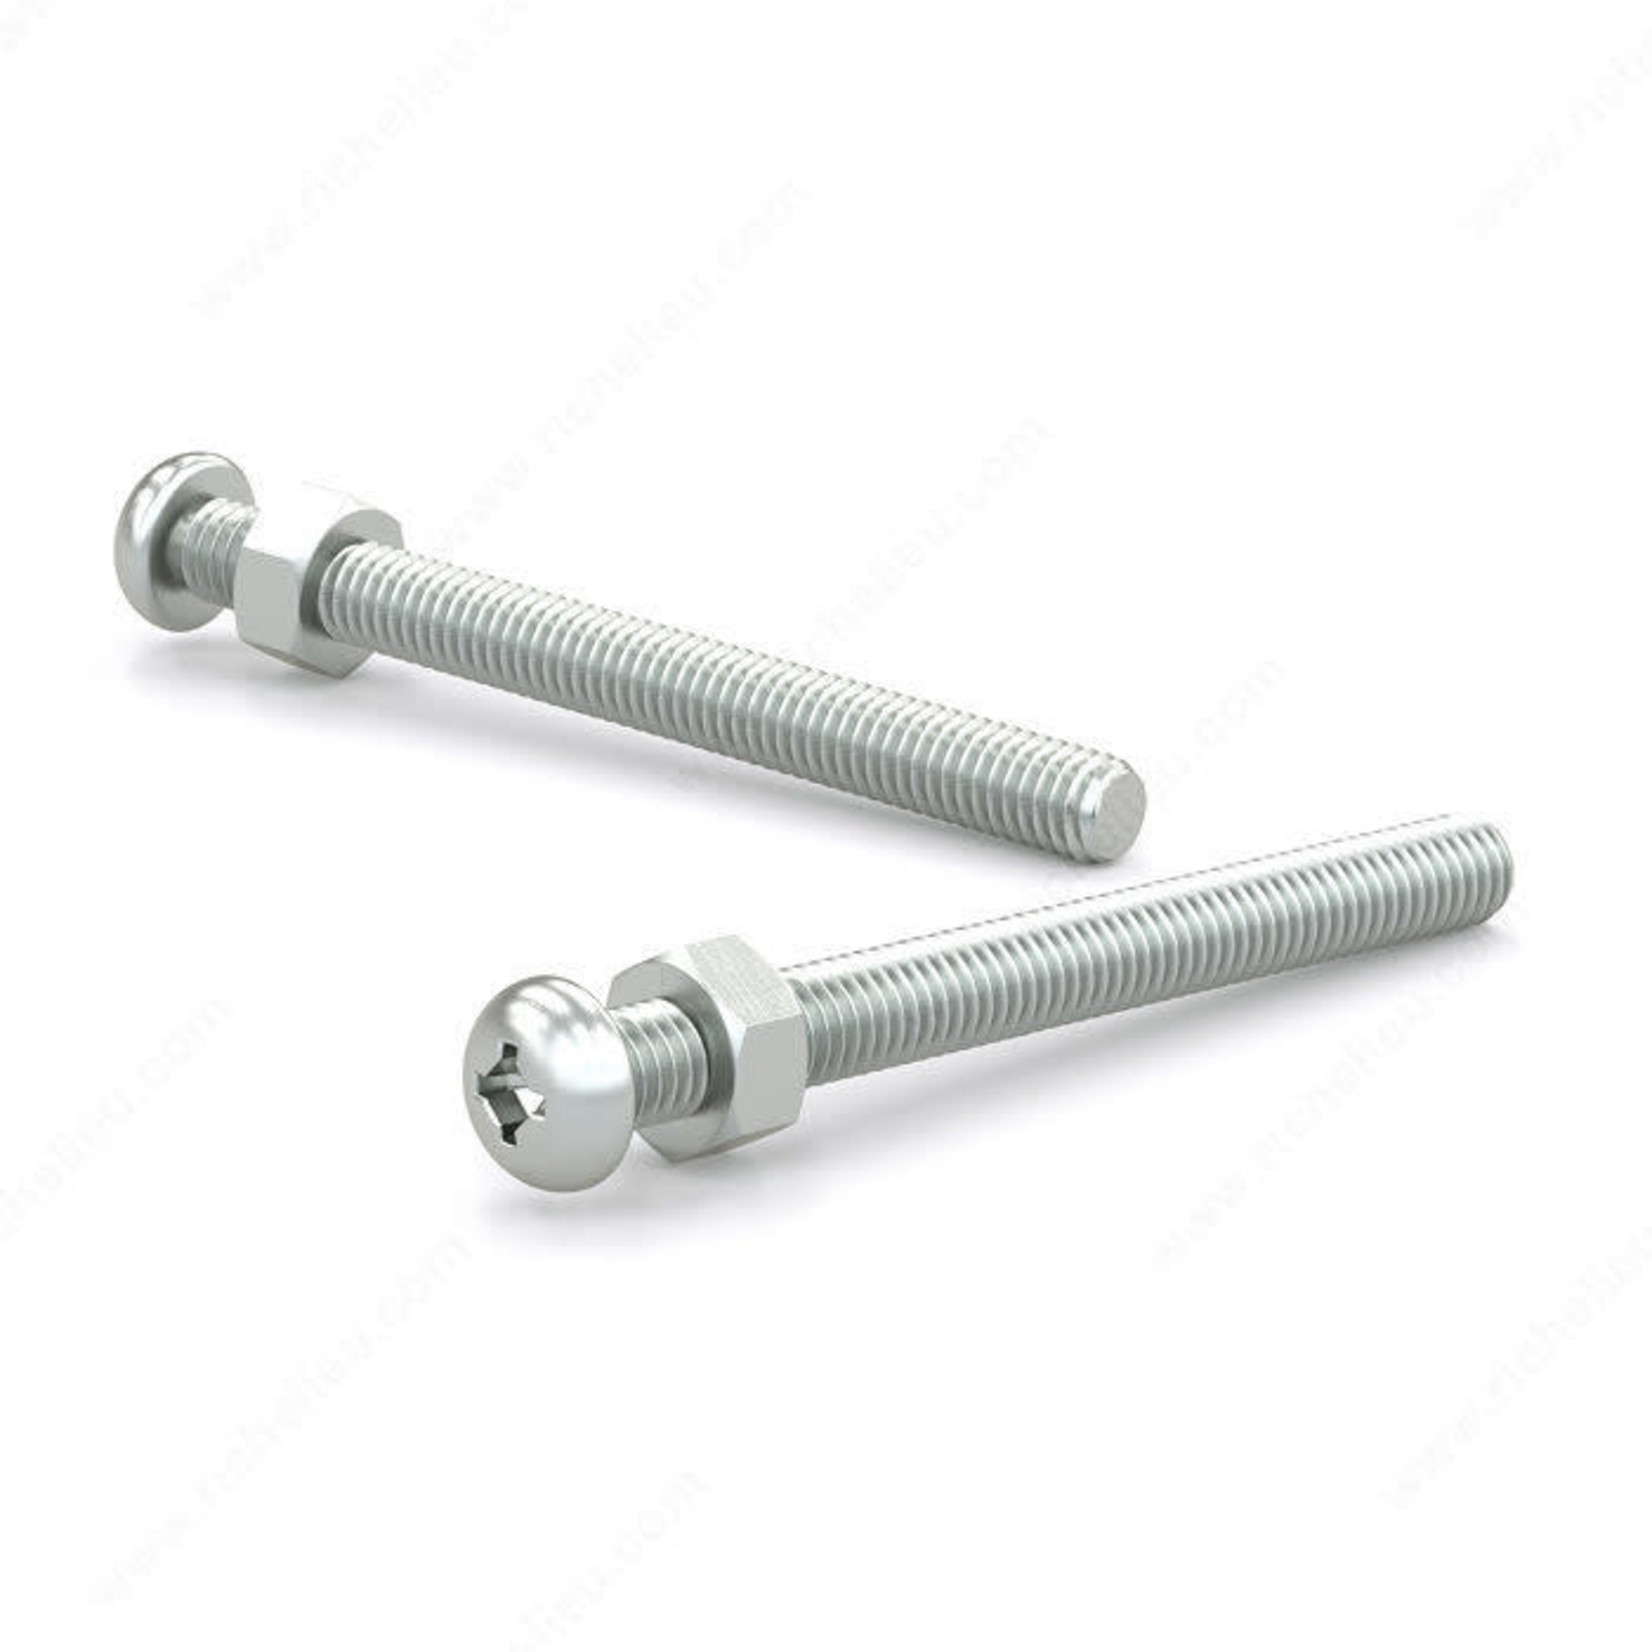 RELIABLE MACHINE SCREW WITH NUT, PAN HEAD, 10-32 2-1/2IN, 6PK BLISTER